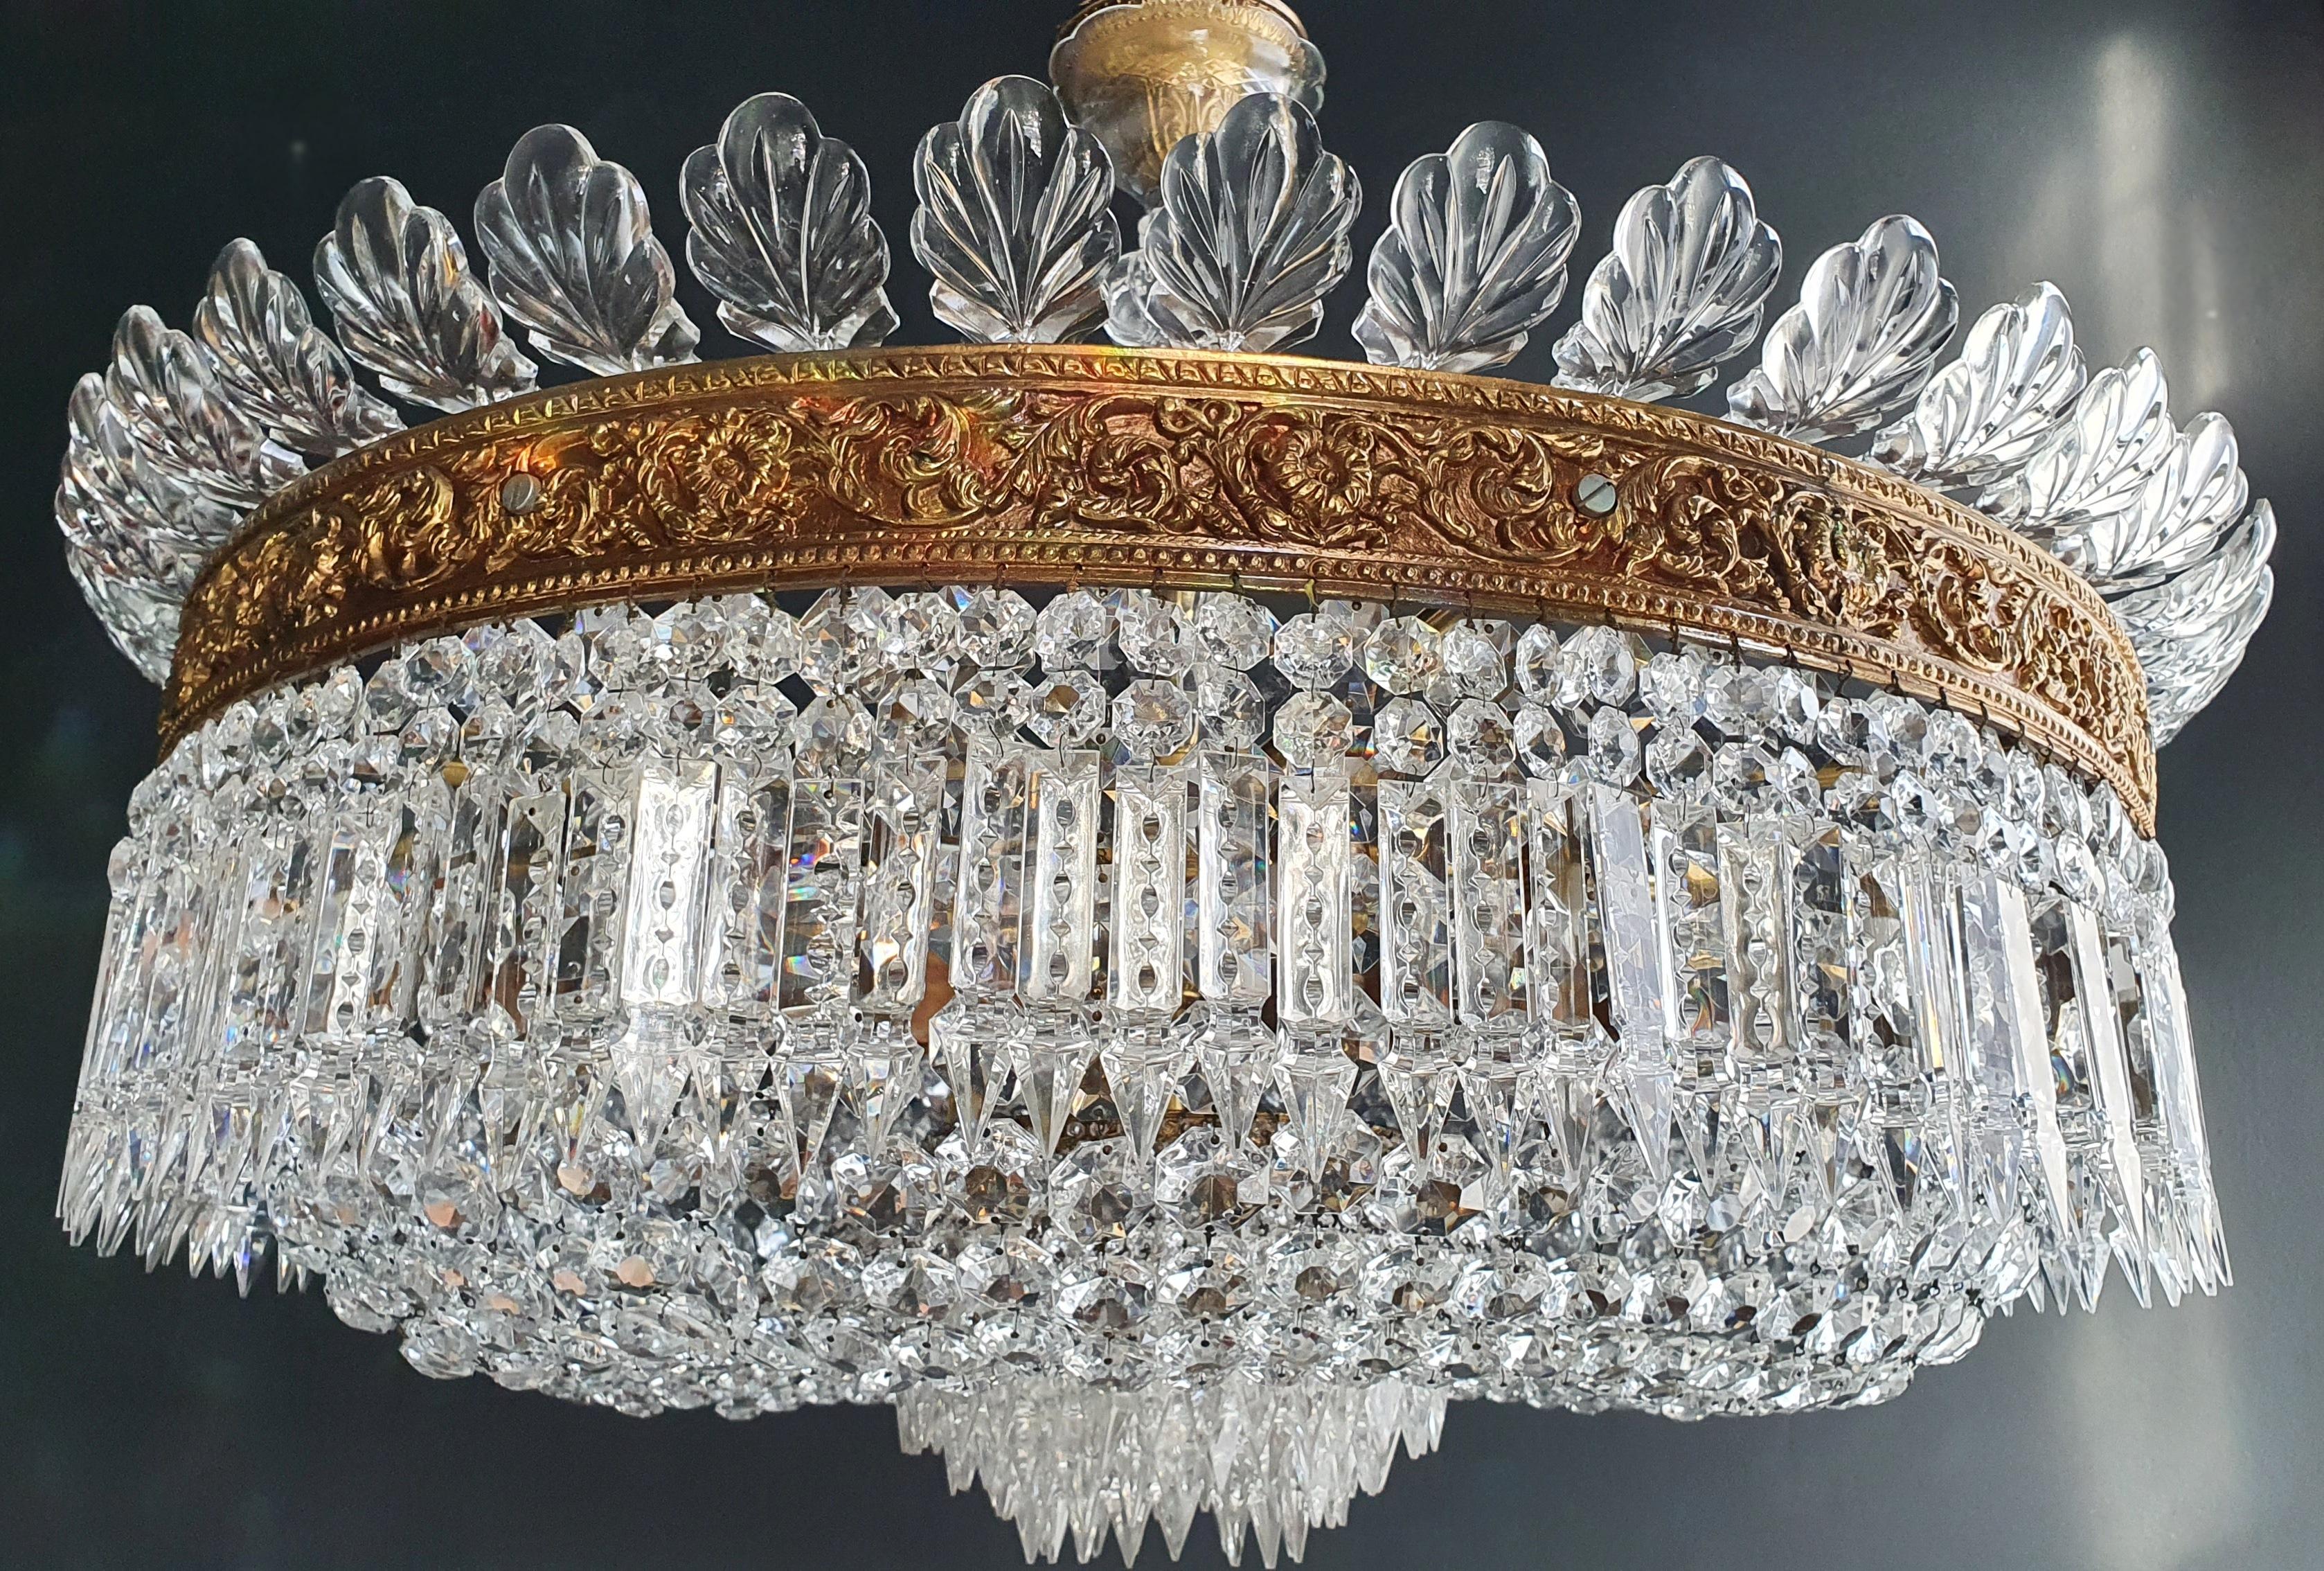 Presenting our exquisite basket chandeliers, meticulously restored to their former glory with love and care in Berlin. The electrical wiring has been upgraded to work seamlessly in the US, making them ready to hang without any hassle. With not a